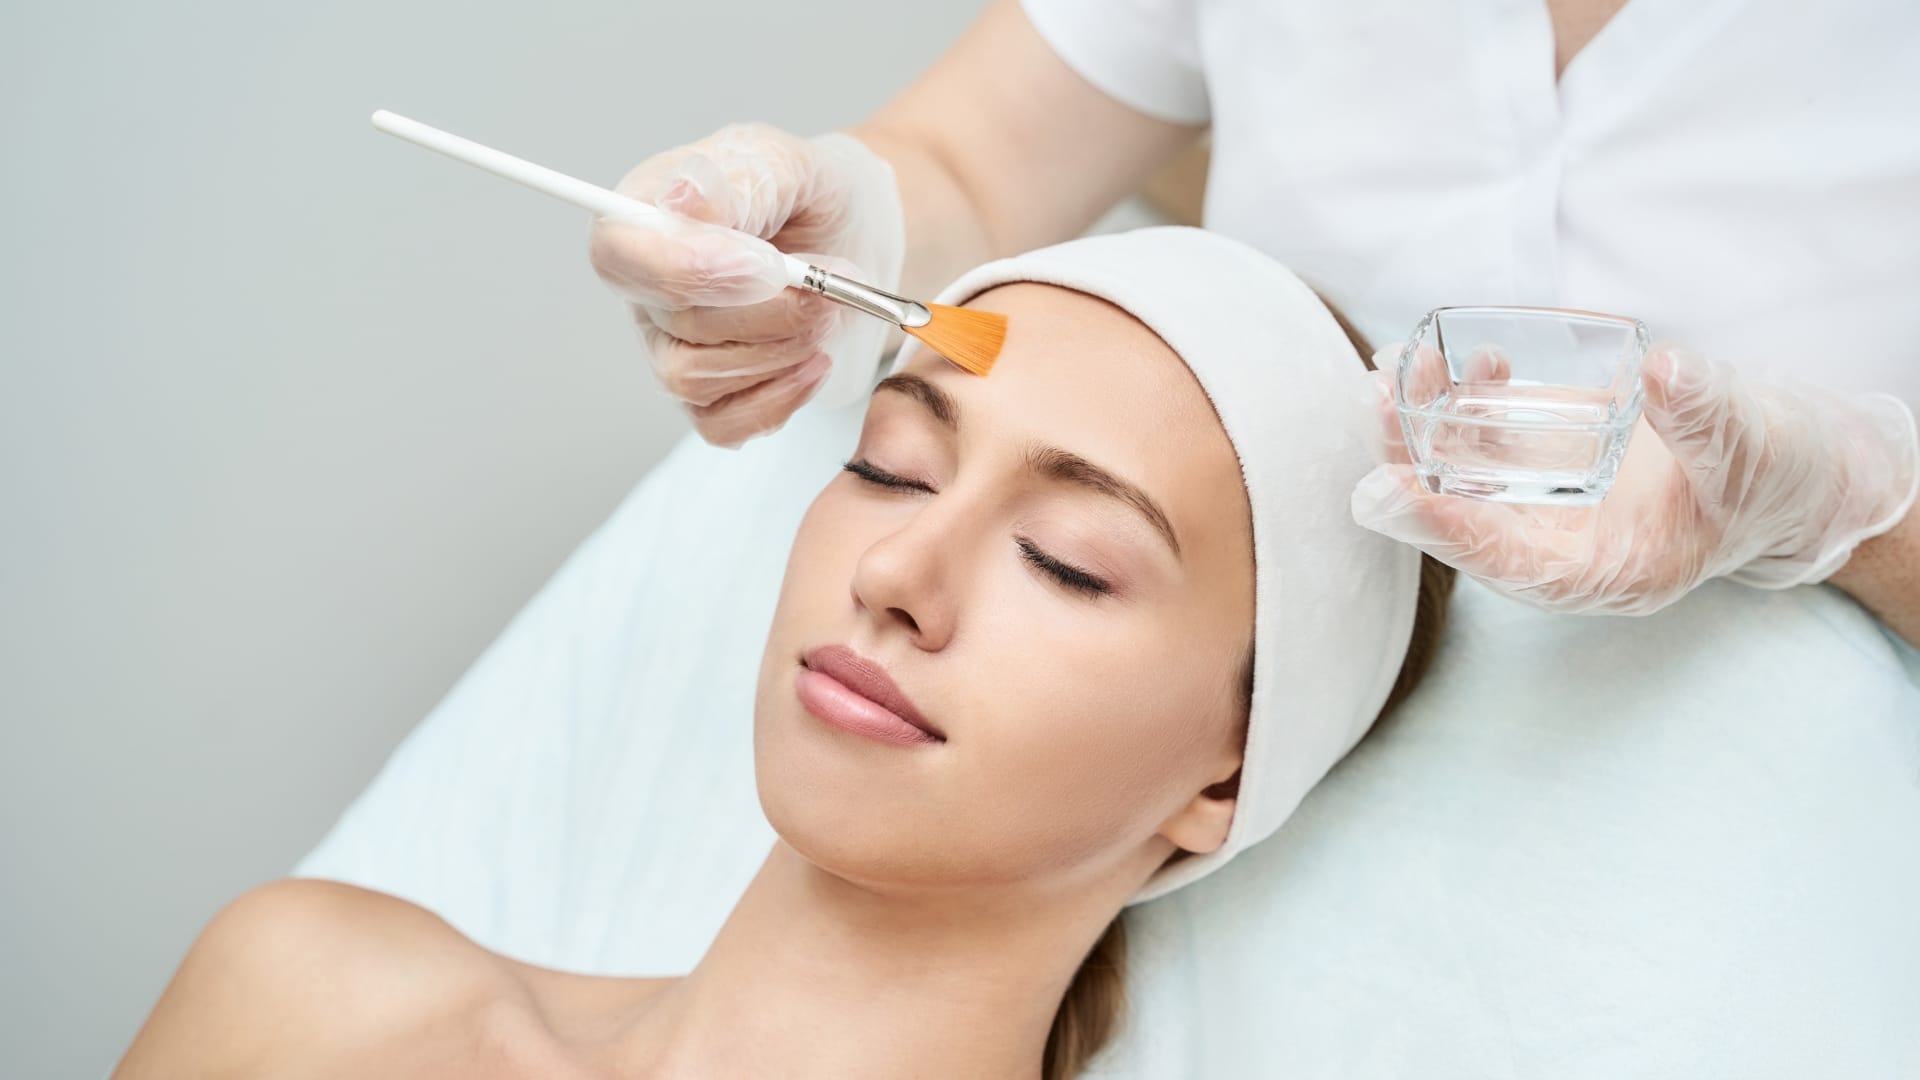 A young woman is undergoing a facial chemical peel treatment.